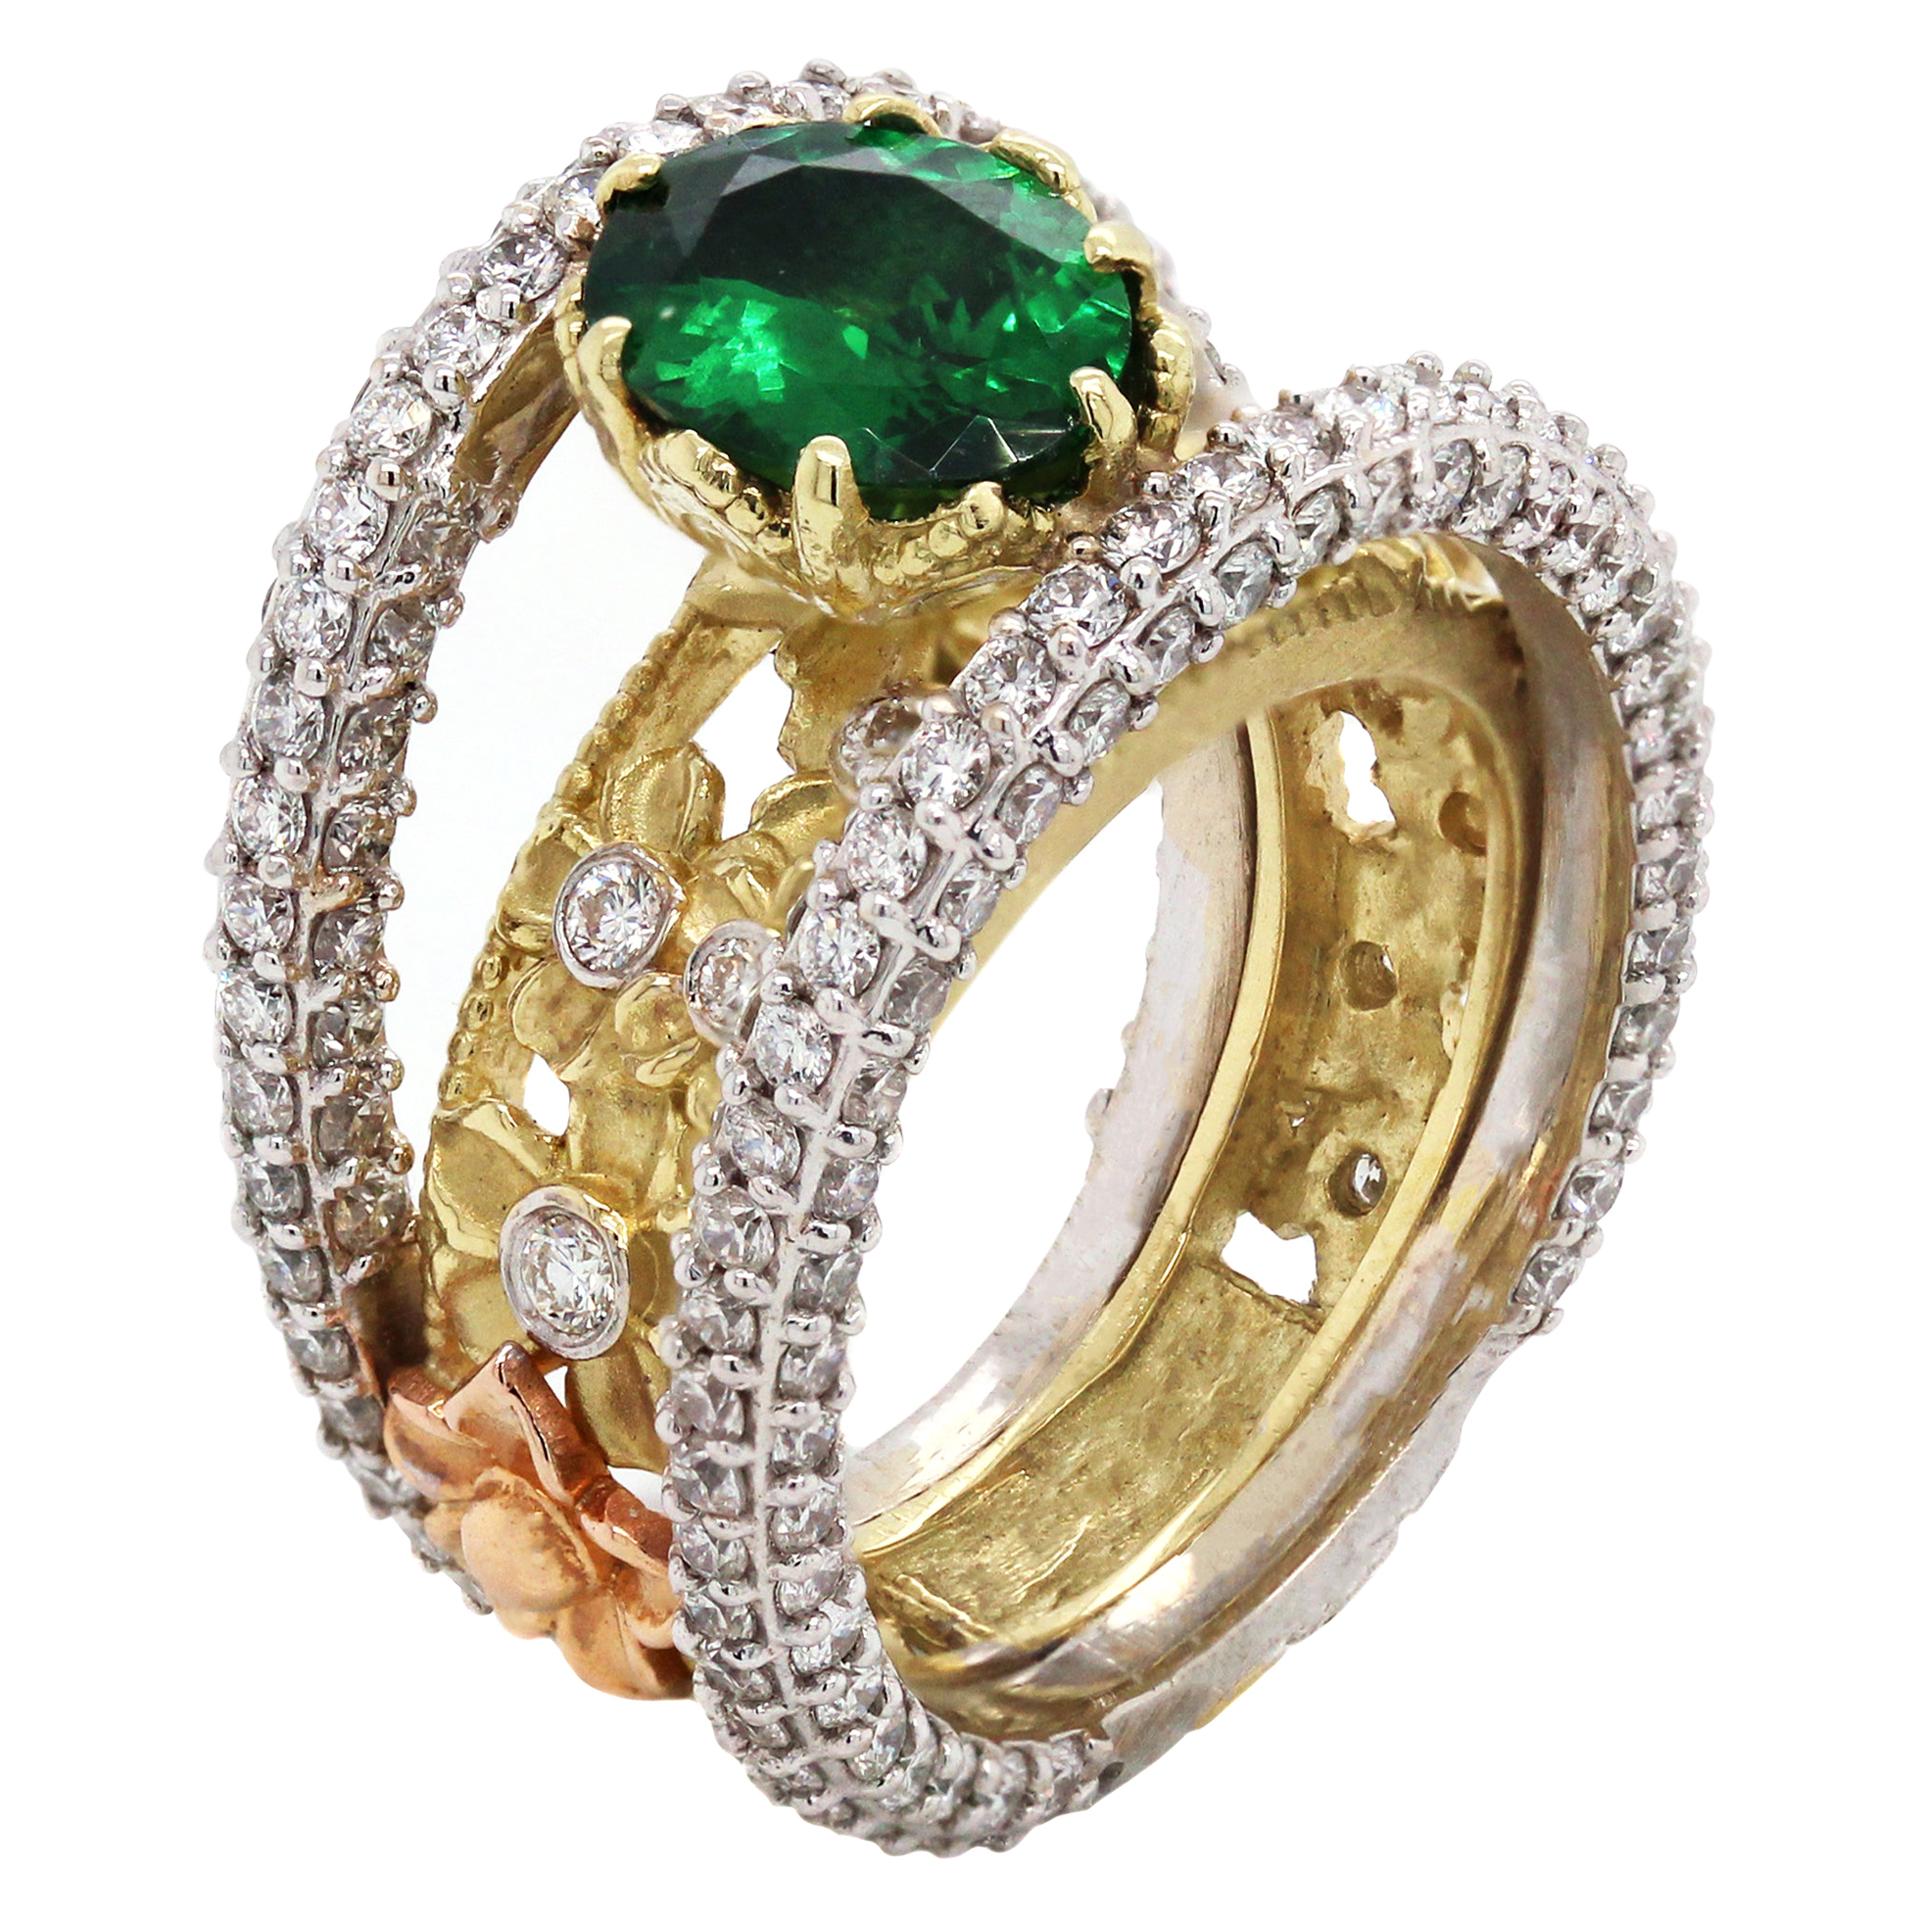 Stambolian Yellow White Rose Gold and Diamond Floral Ring with Tsavorite Center